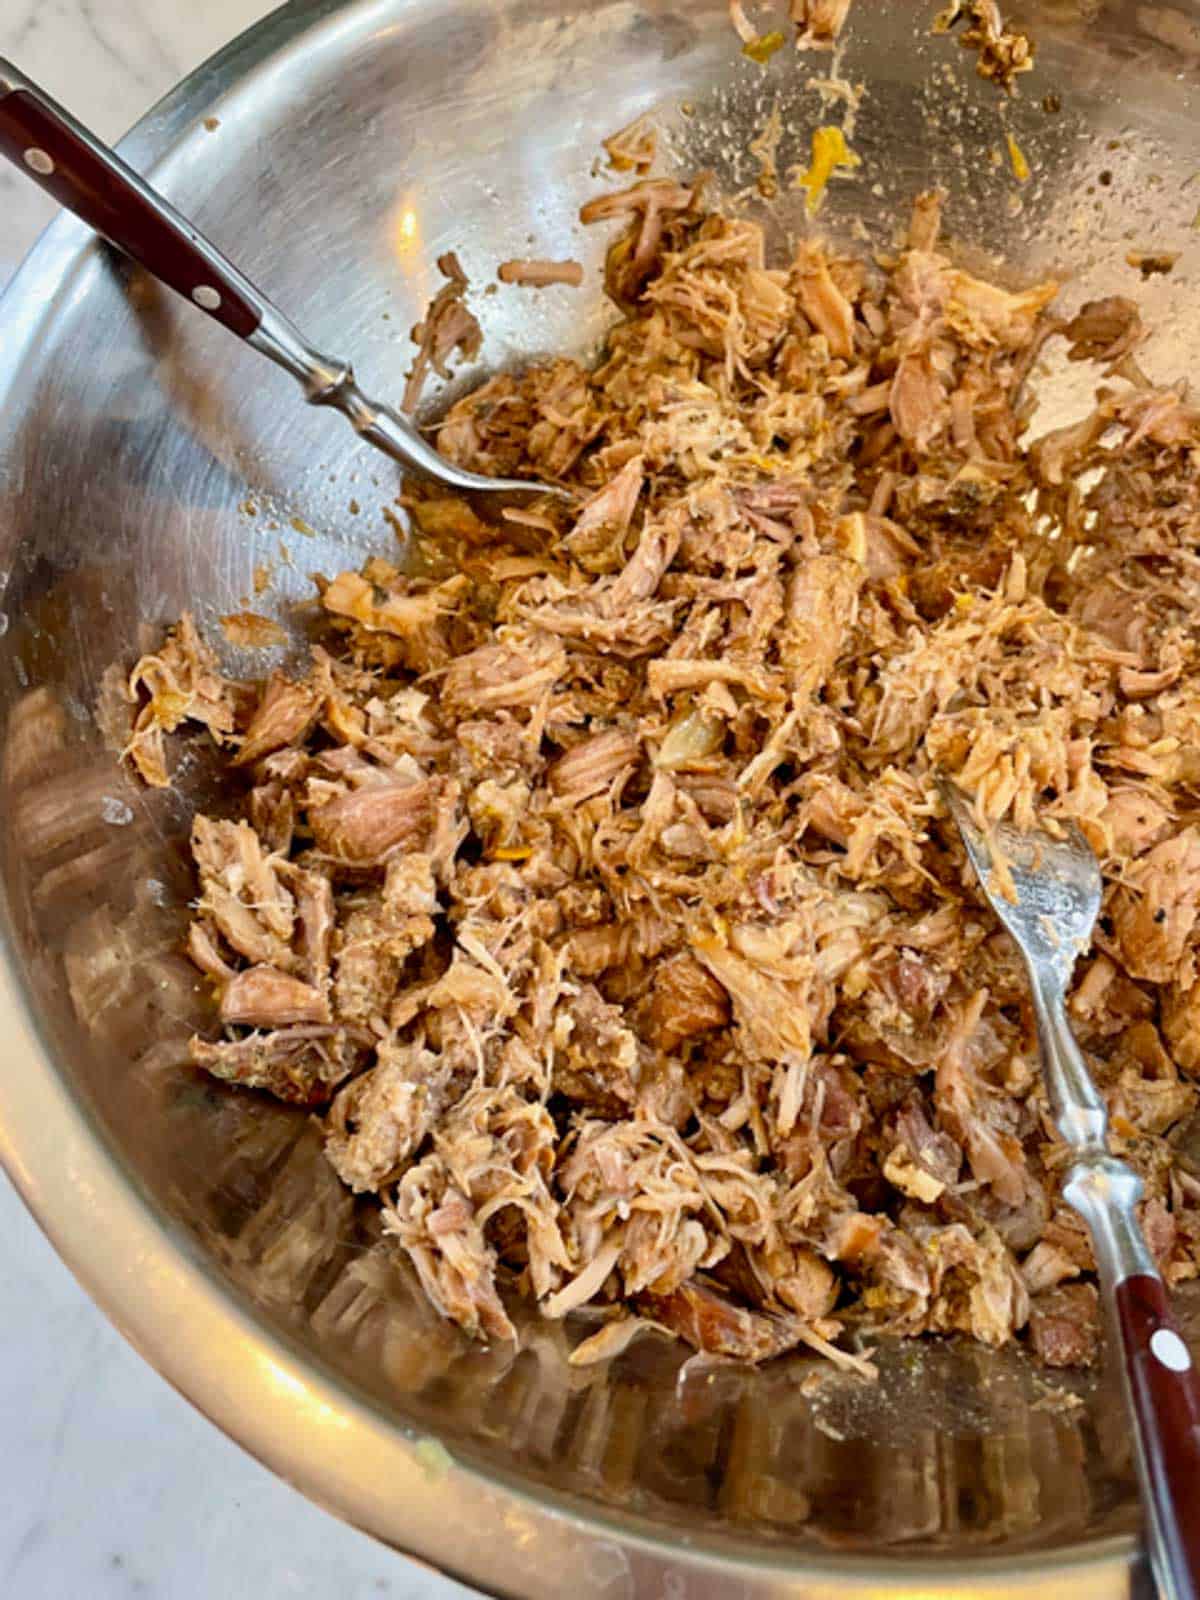 Pulling apart braised pork with forks in a large bowl